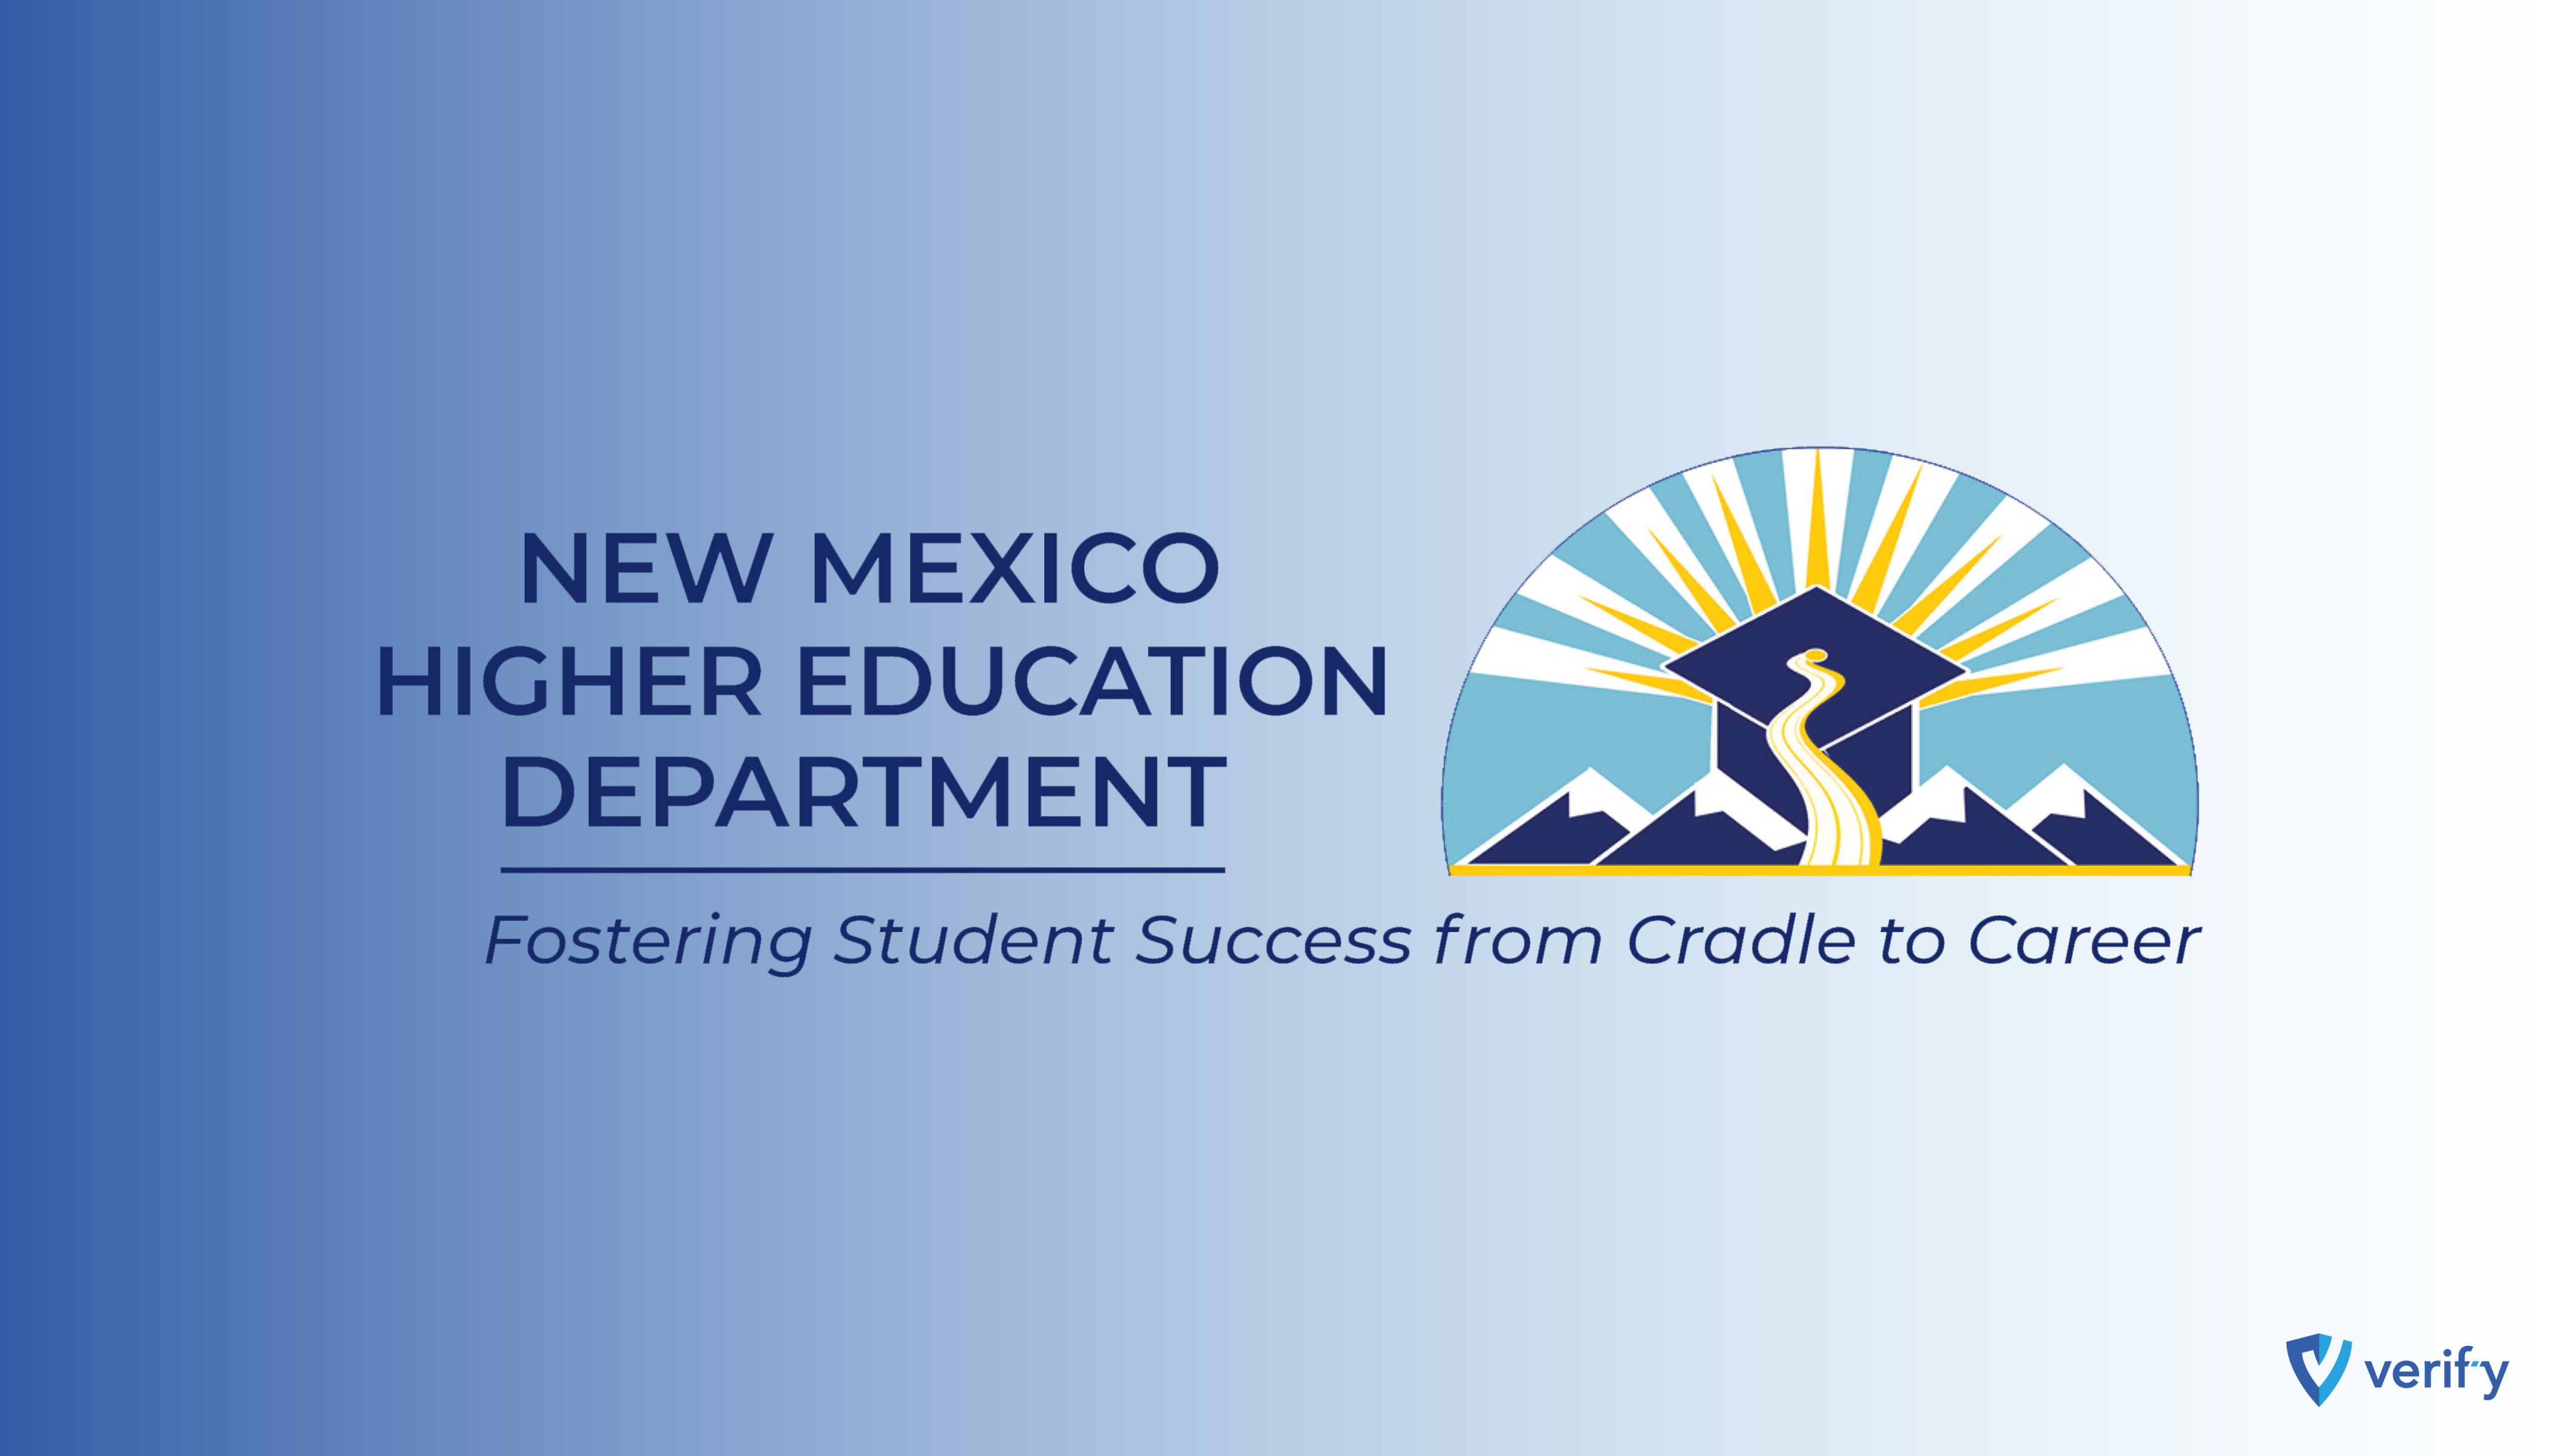 New Mexico Higher Education Department logo and Verif-y logo